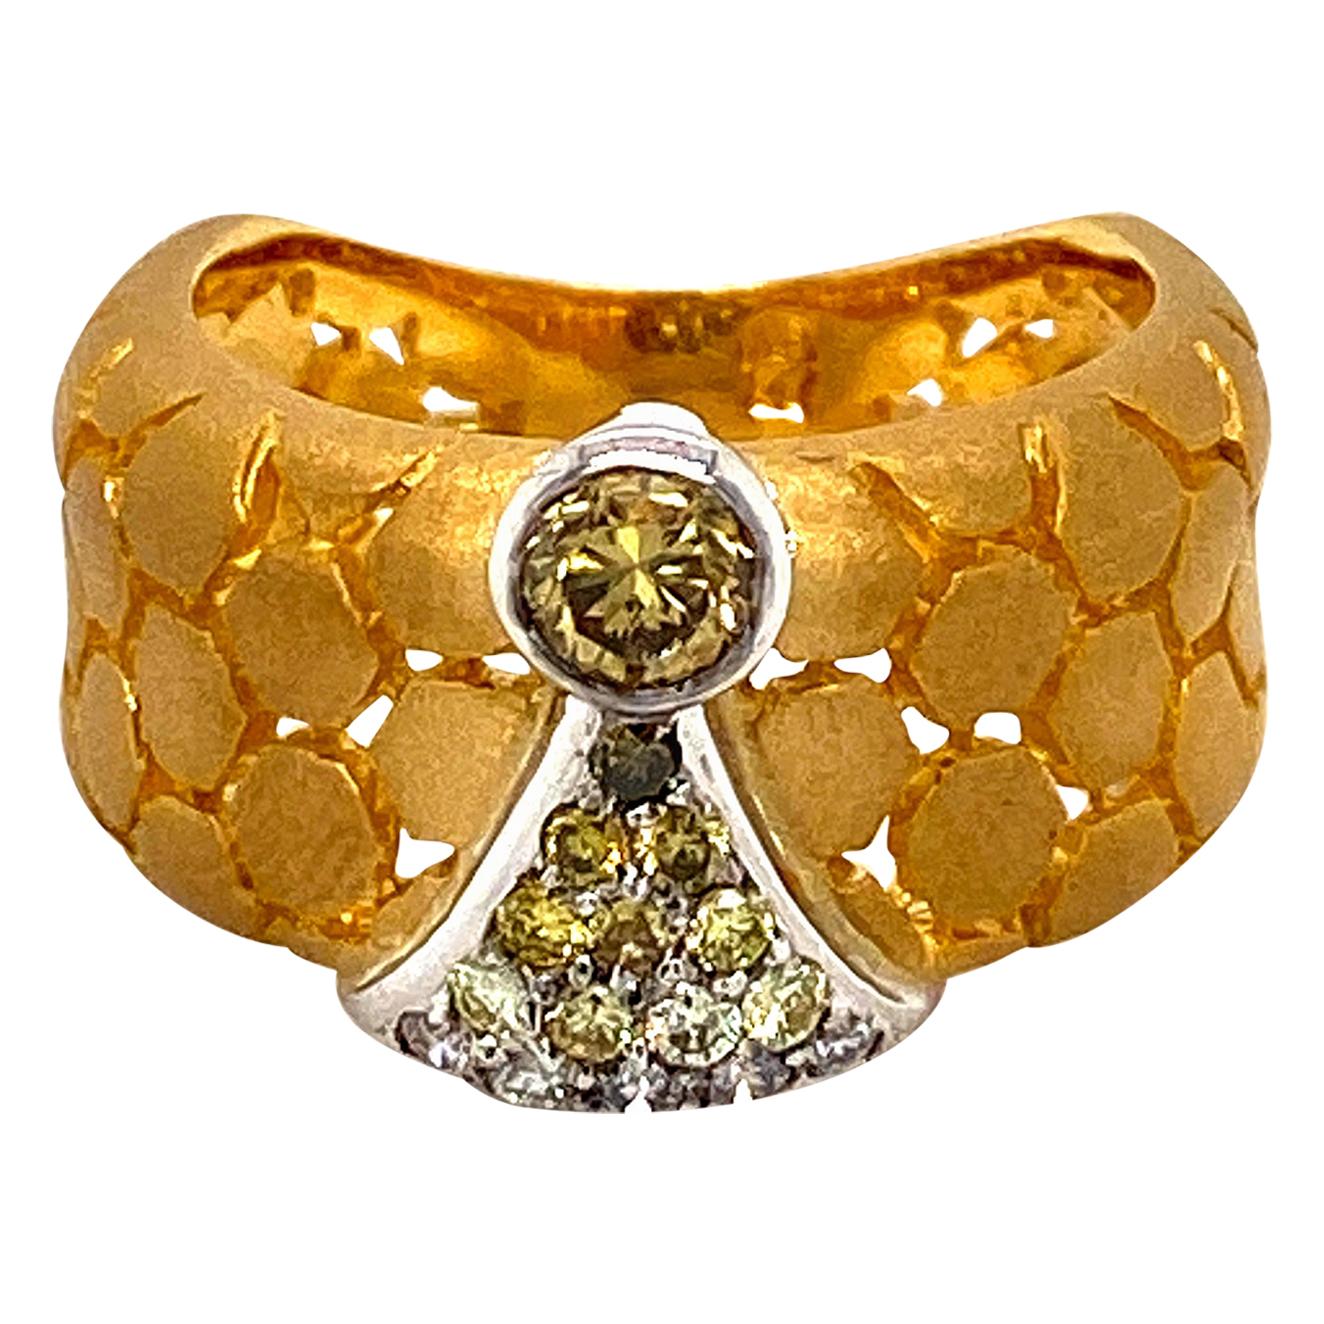 Honeycomb Fancy Color and White Diamond Band Ring in 18 Karat Gold